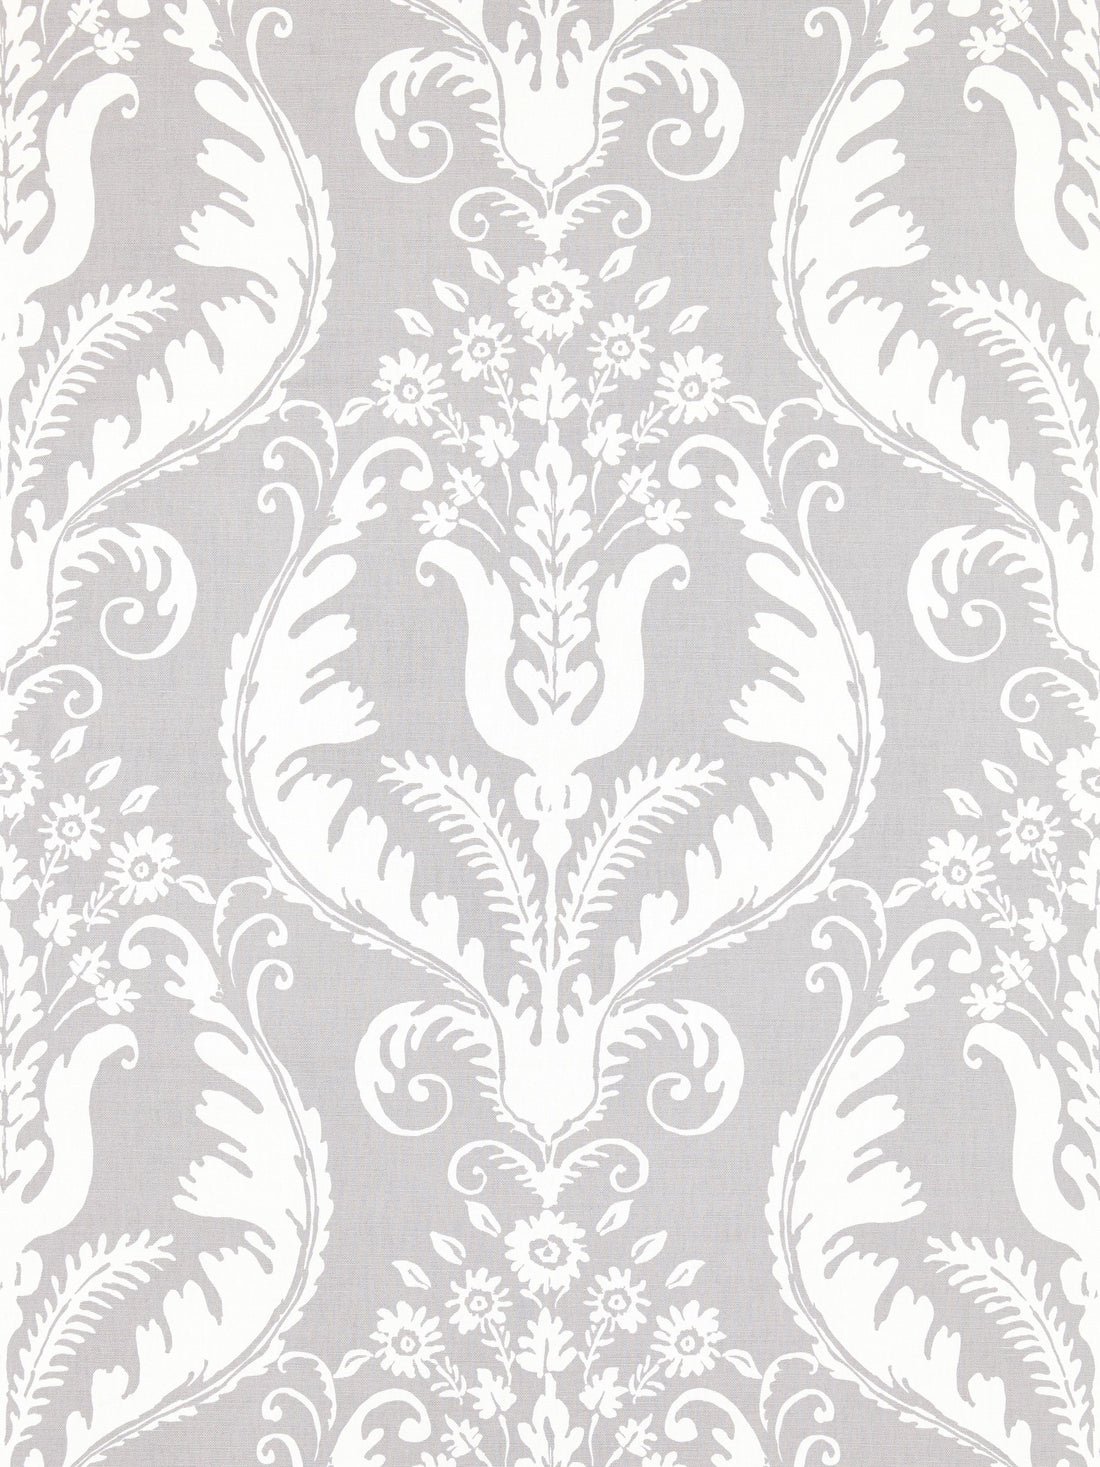 Primavera Linen Print fabric in french grey color - pattern number SC 000416597 - by Scalamandre in the Scalamandre Fabrics Book 1 collection